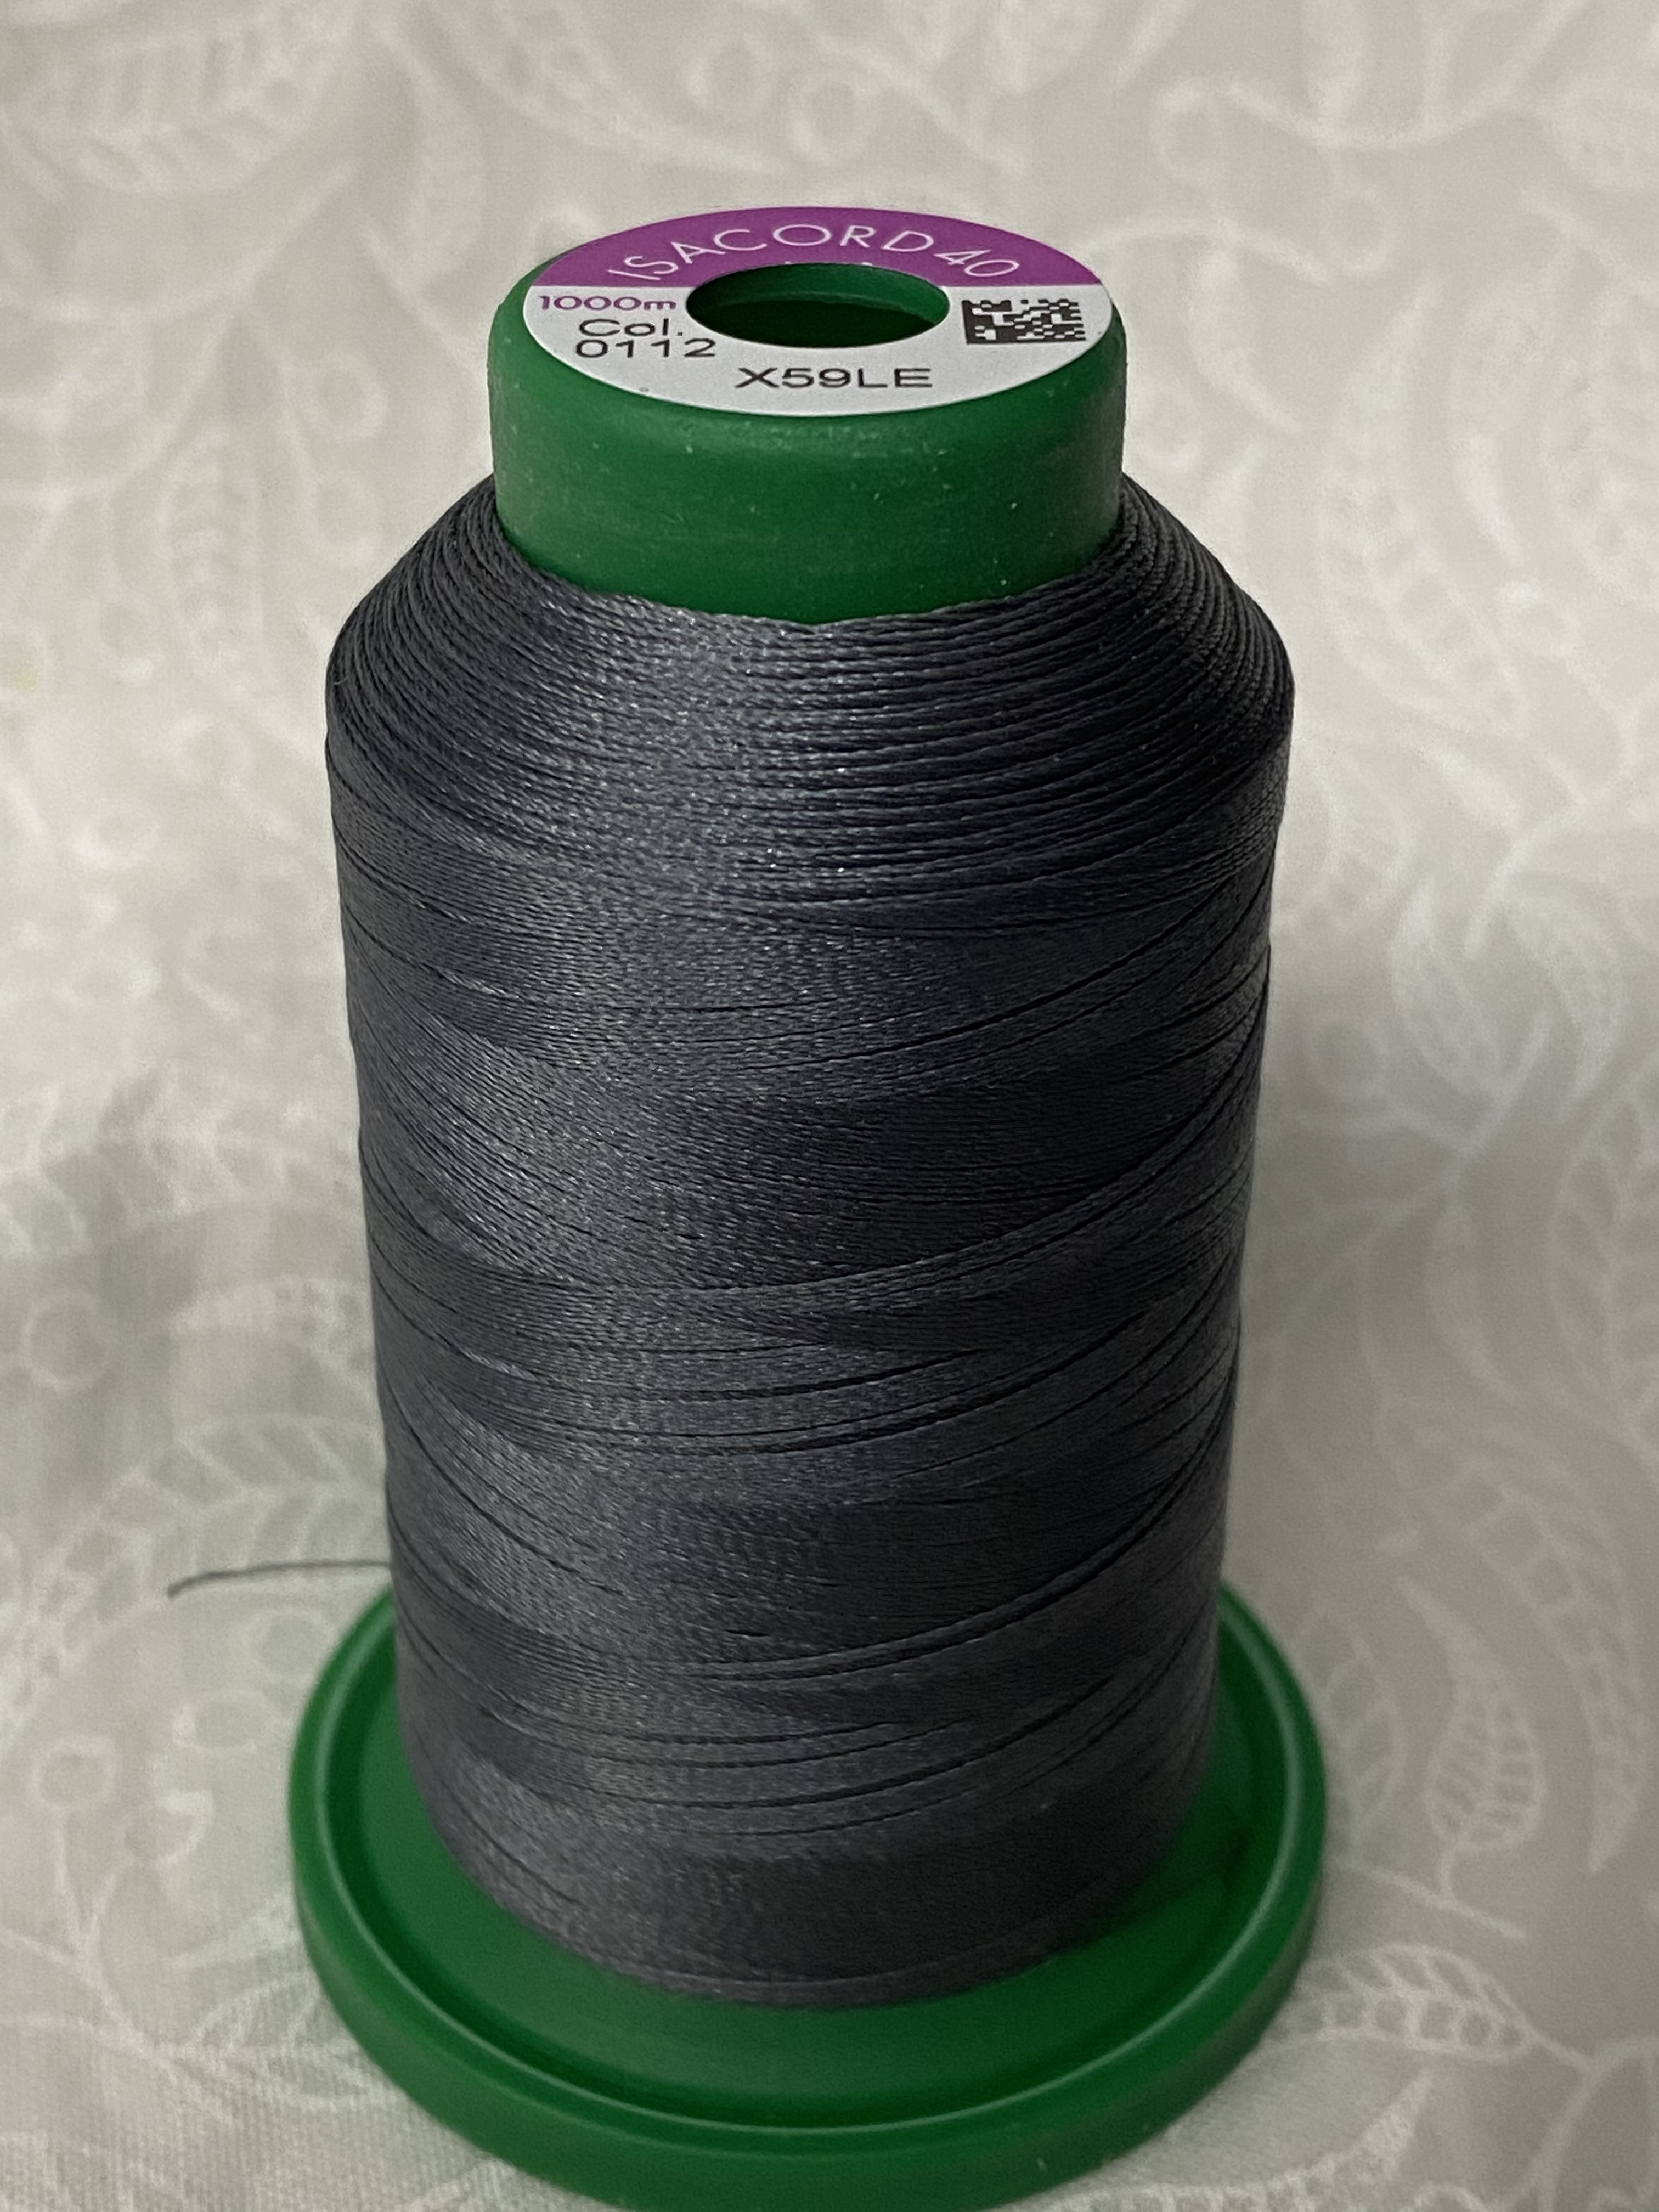 Isacord Embroidery Thread - Impatiens 2650 - 1000m